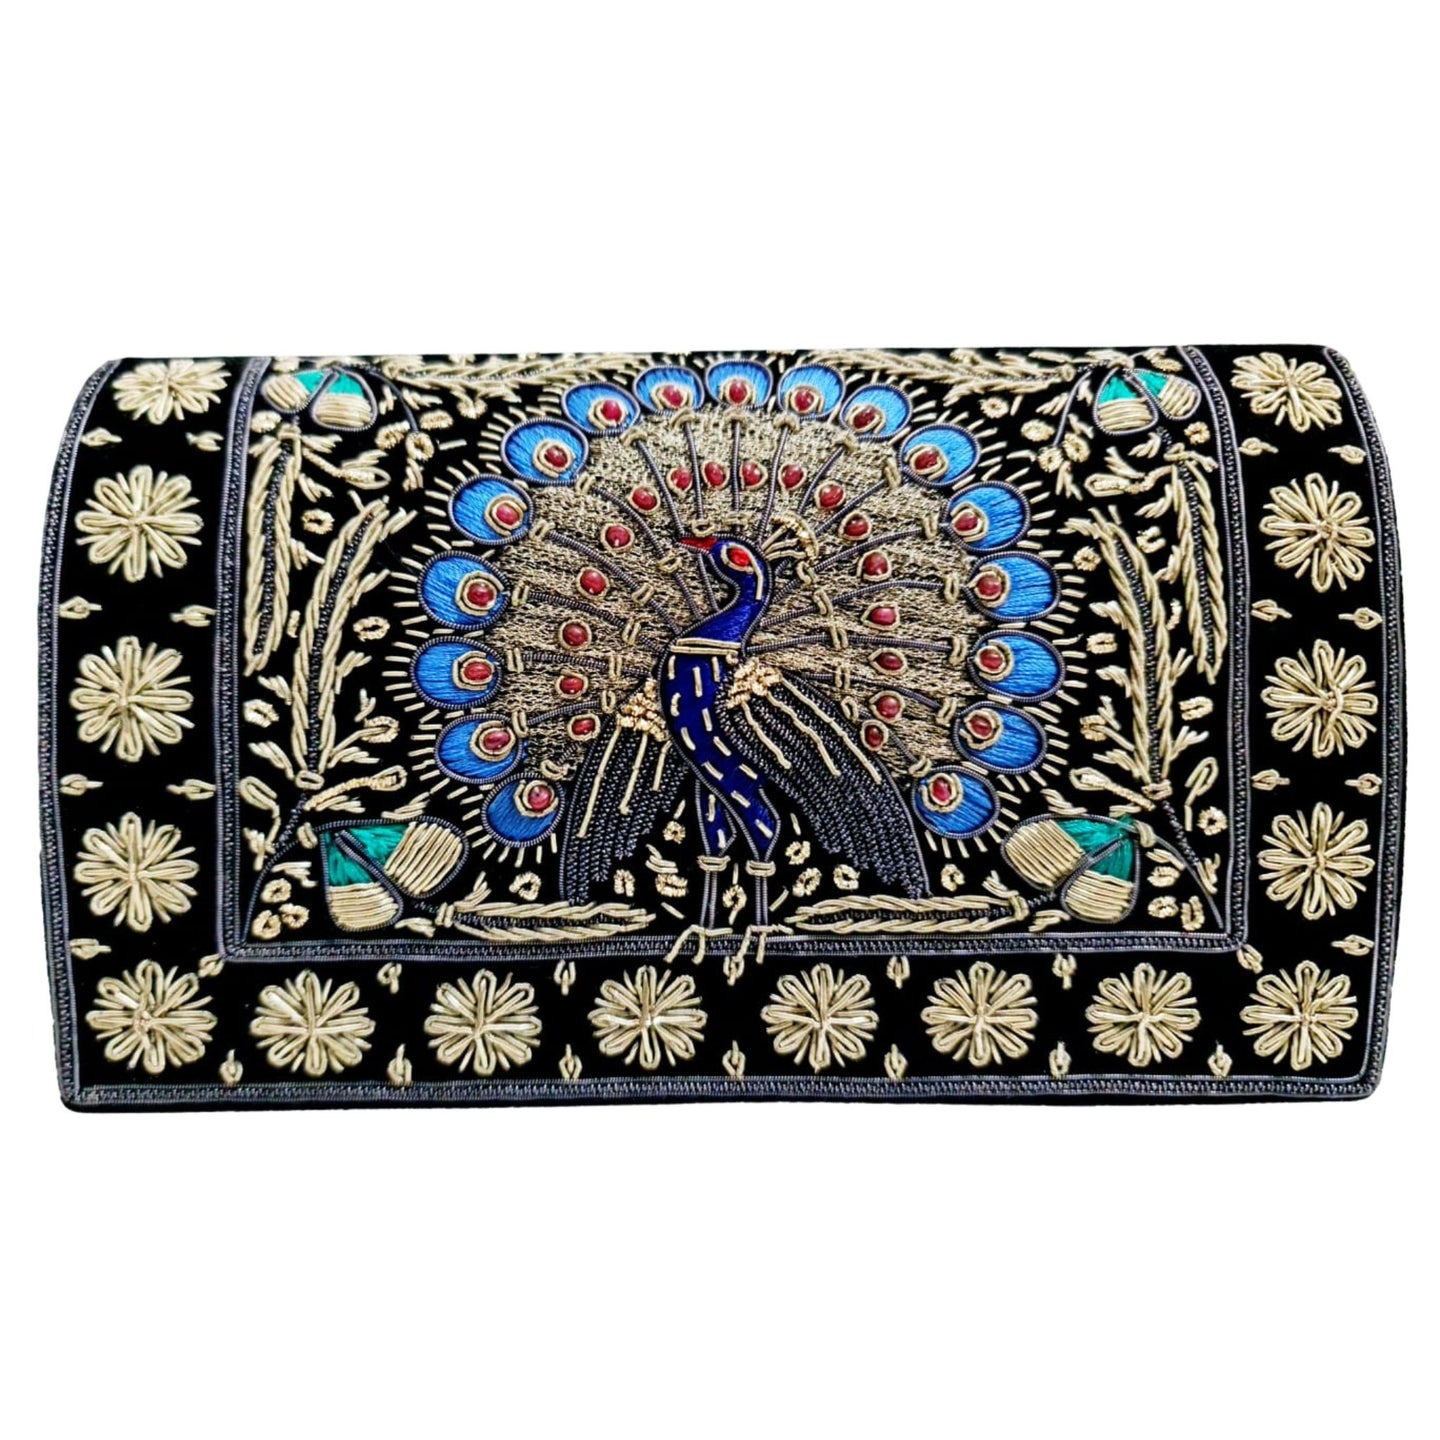 Vintage Inspired Peacock Clutch